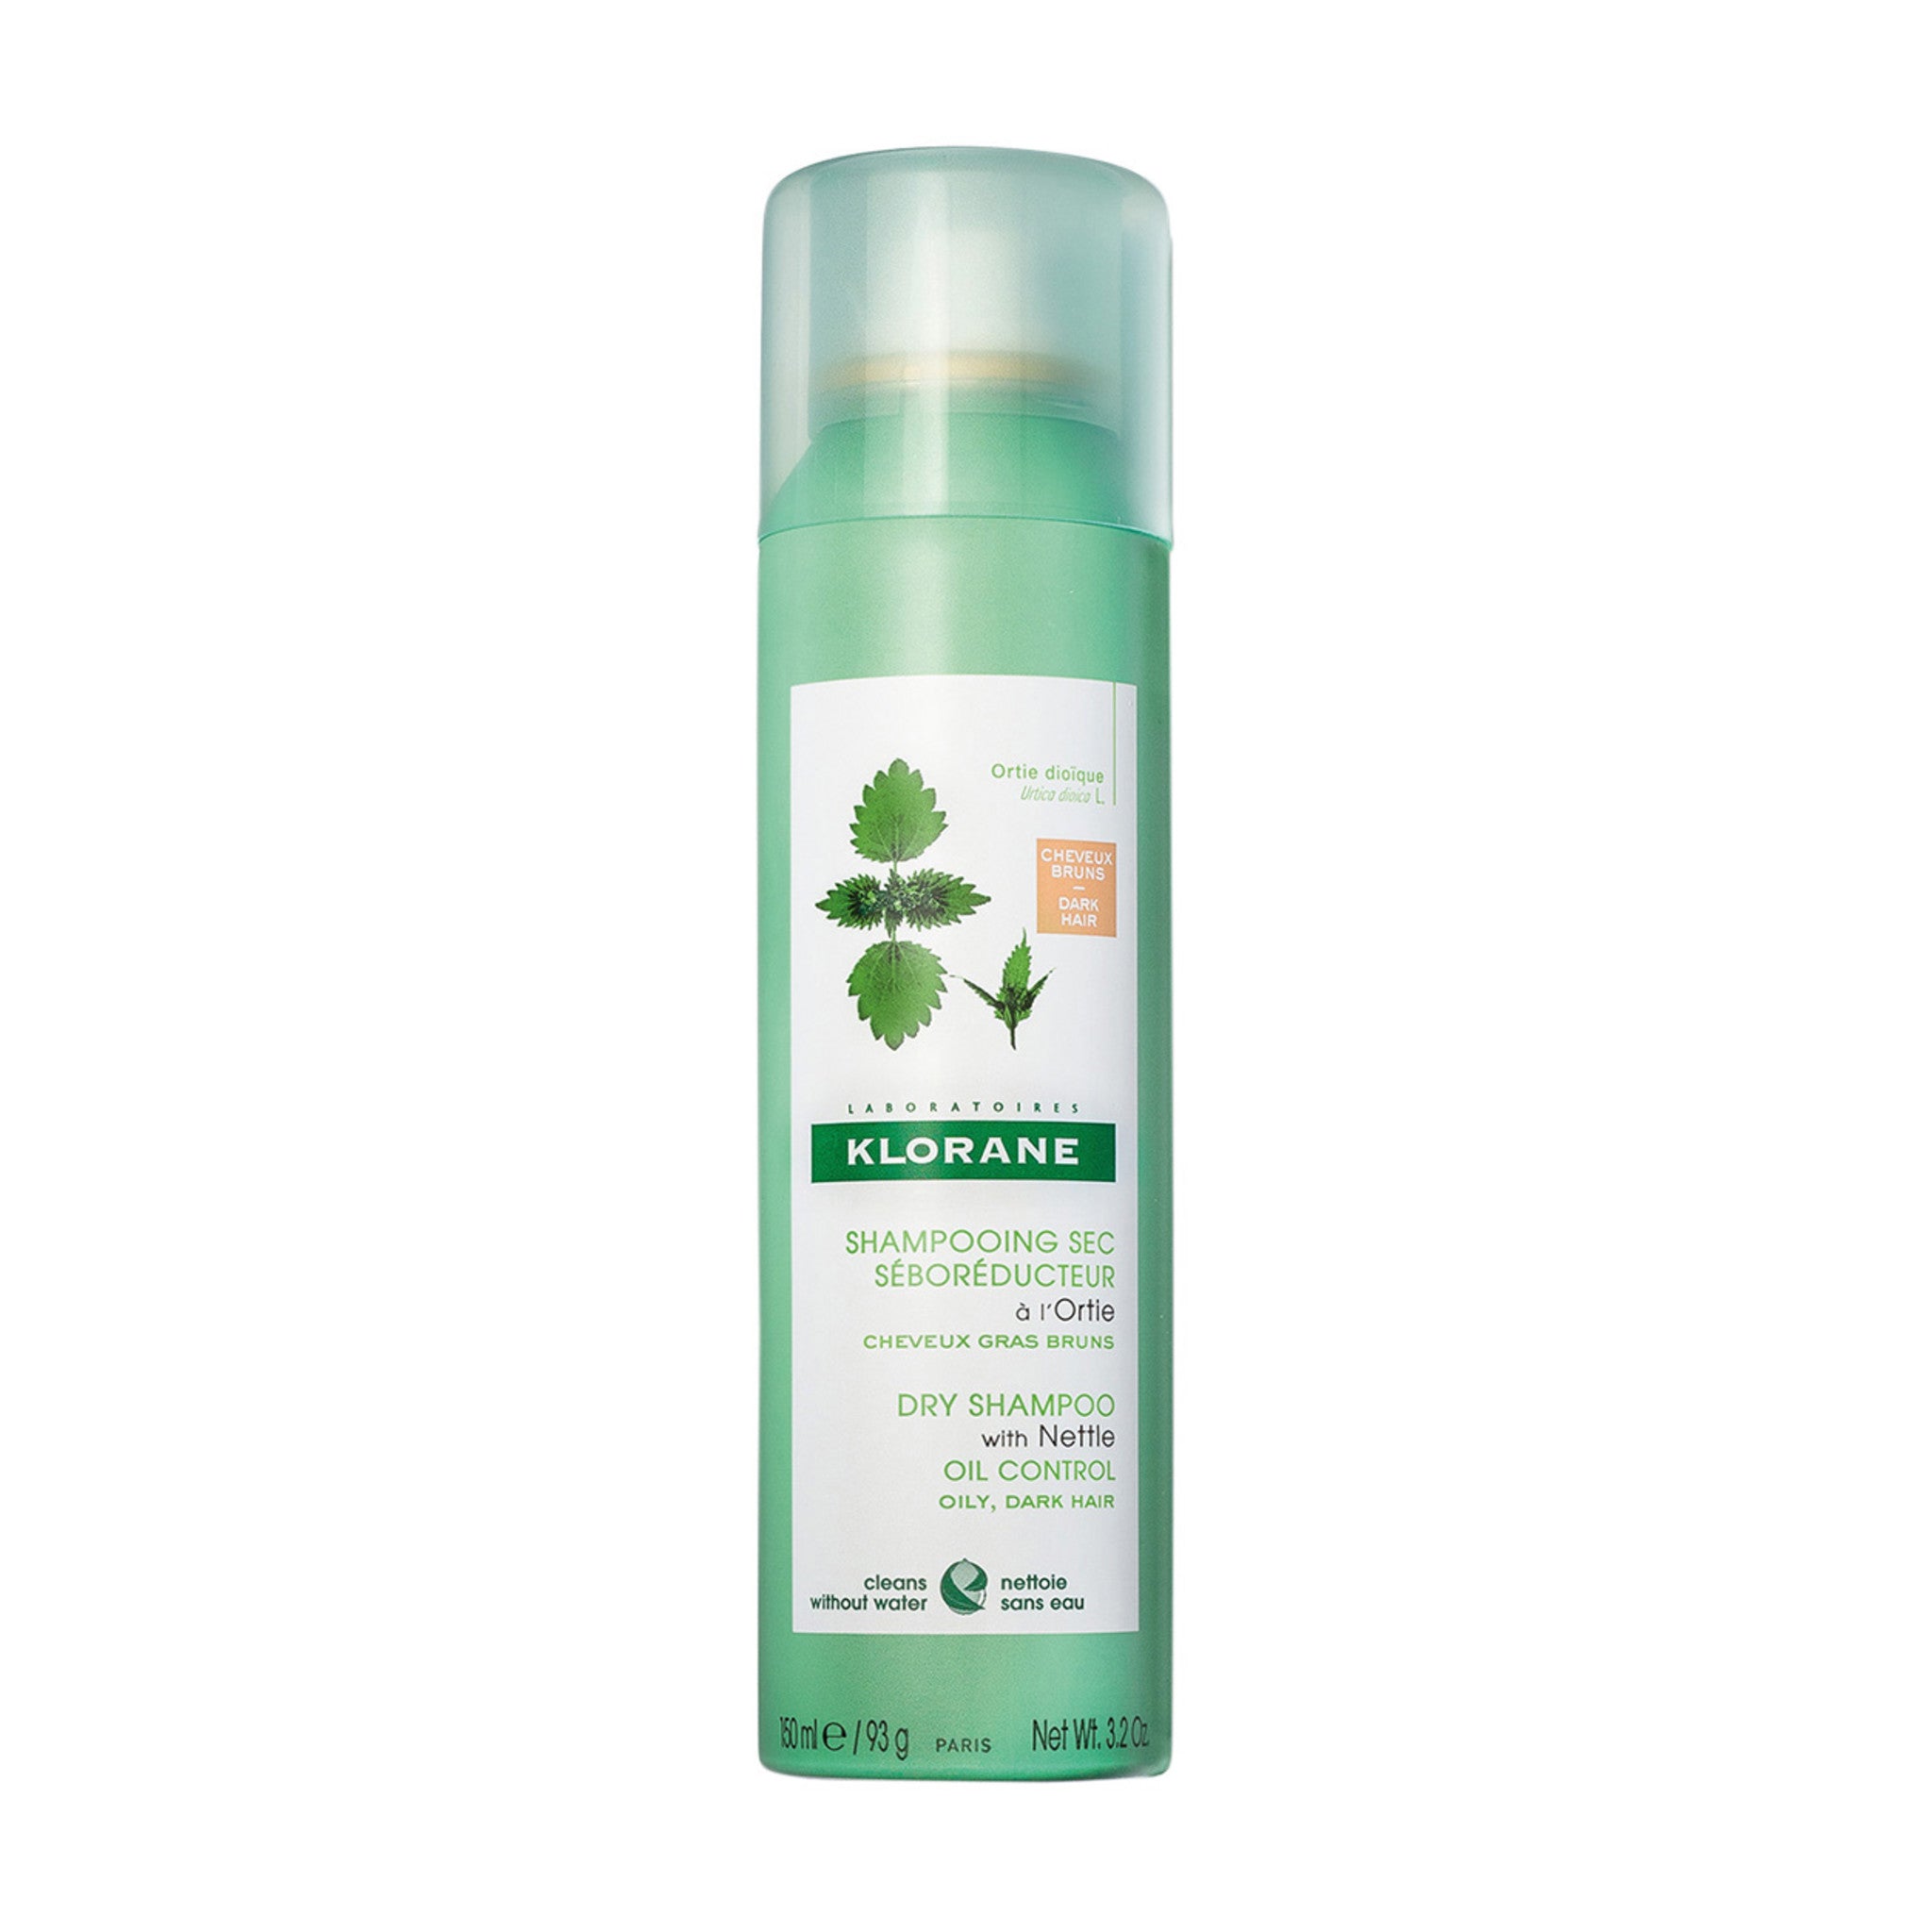 Klorane Dry Shampoo With Nettle for Dark Hair Size variant: 3.2 oz main image.